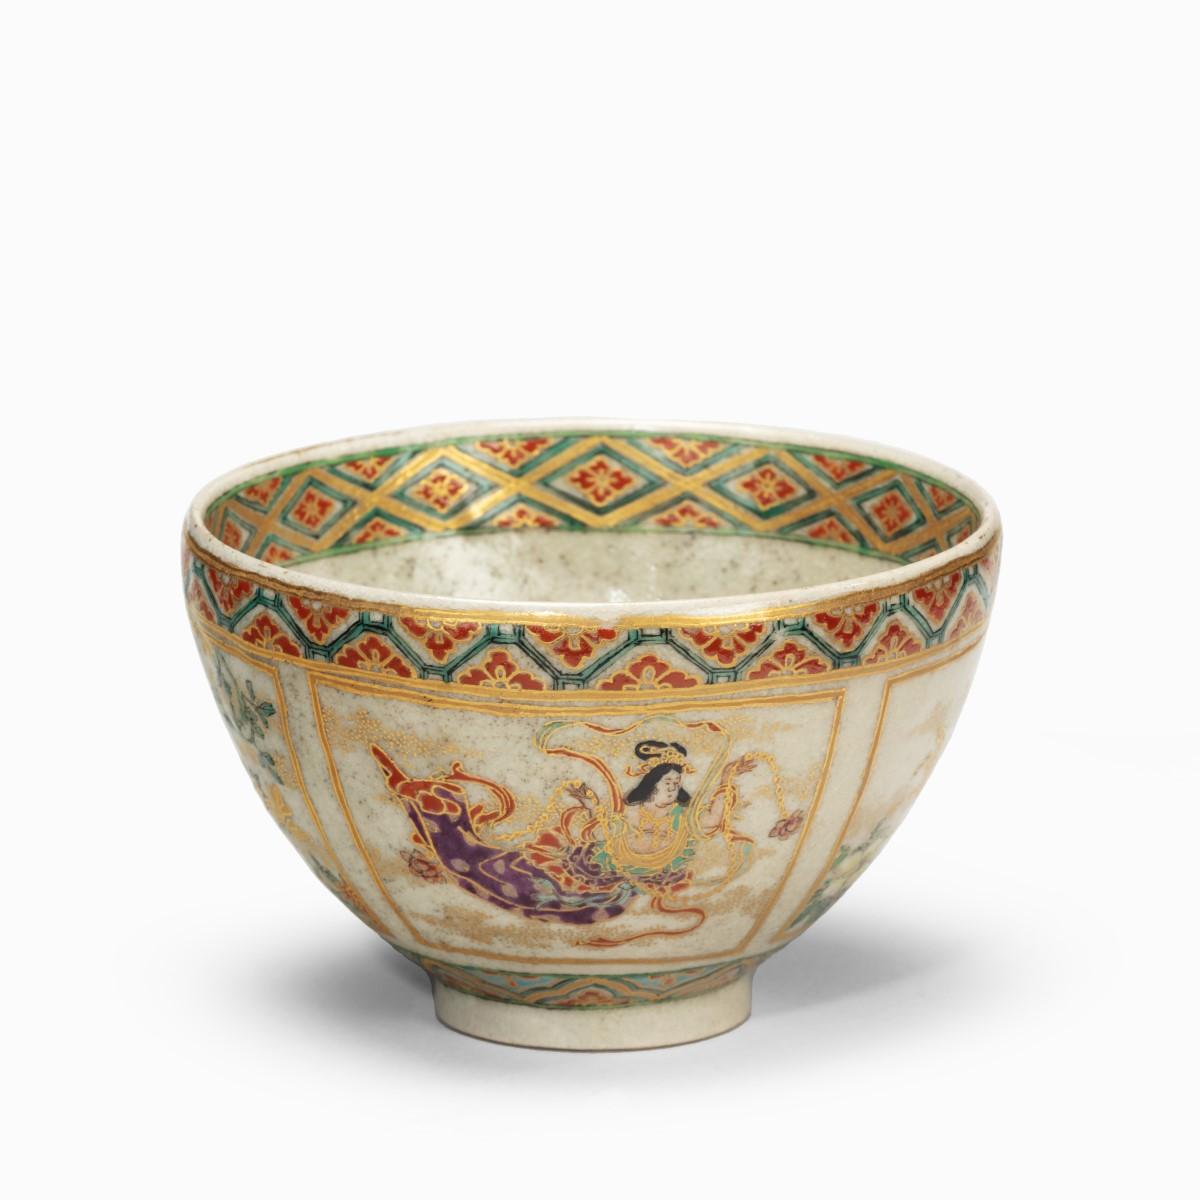 A small Satsuma earthenware tea bowl, the speckled greyish body decorated with four panels of alternating bijinand flowers, painted in overglaze enamels and gilt. Japanese, circa 1900.